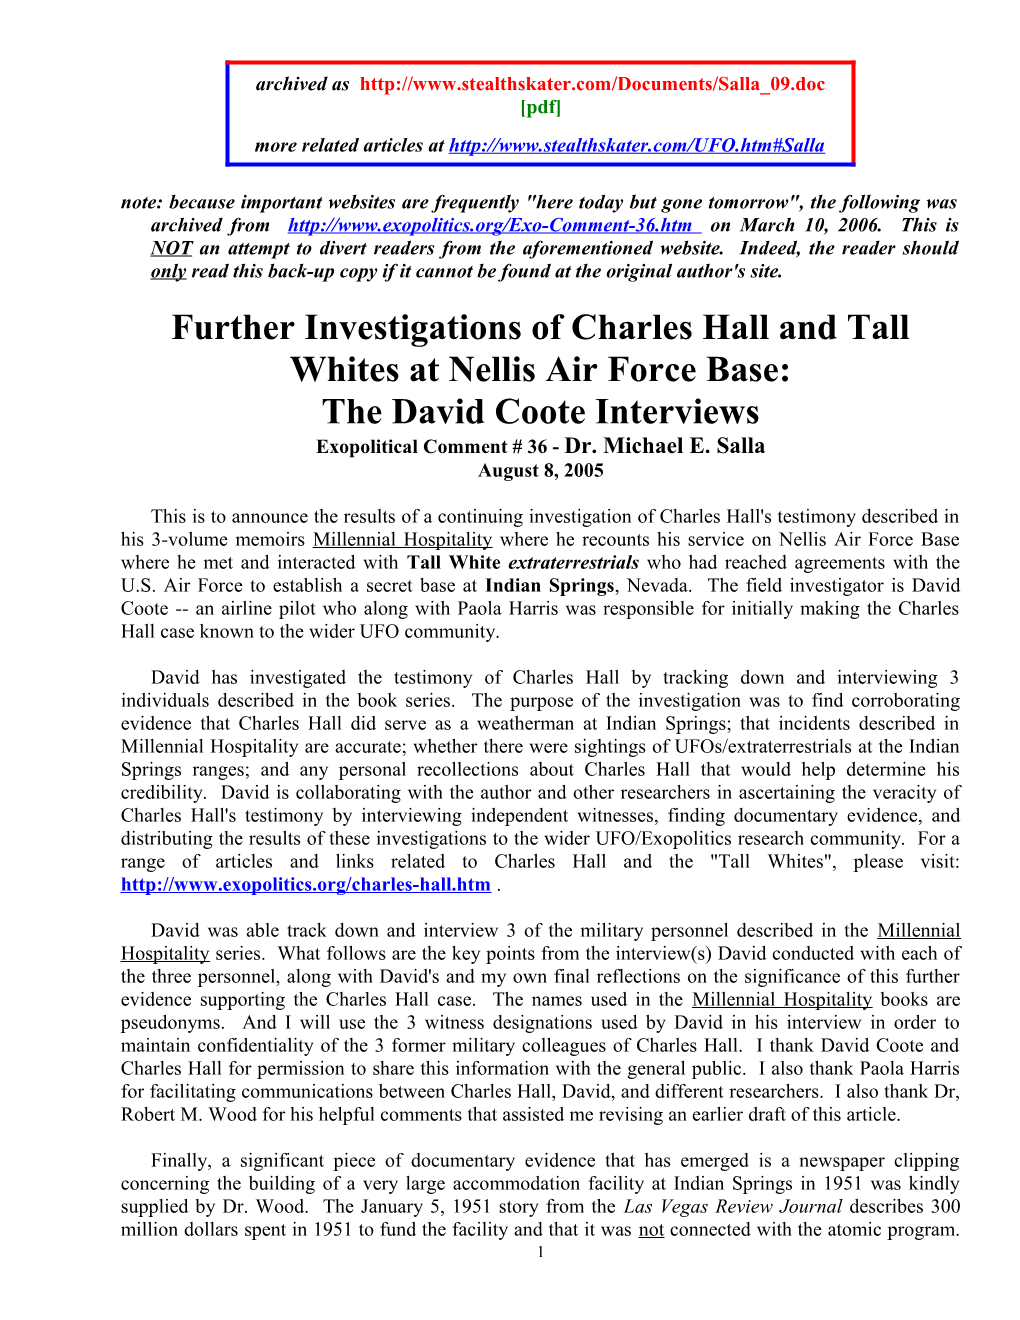 Further Investigations of Charles Hall and Tall Whites at Nellis Air Force Base